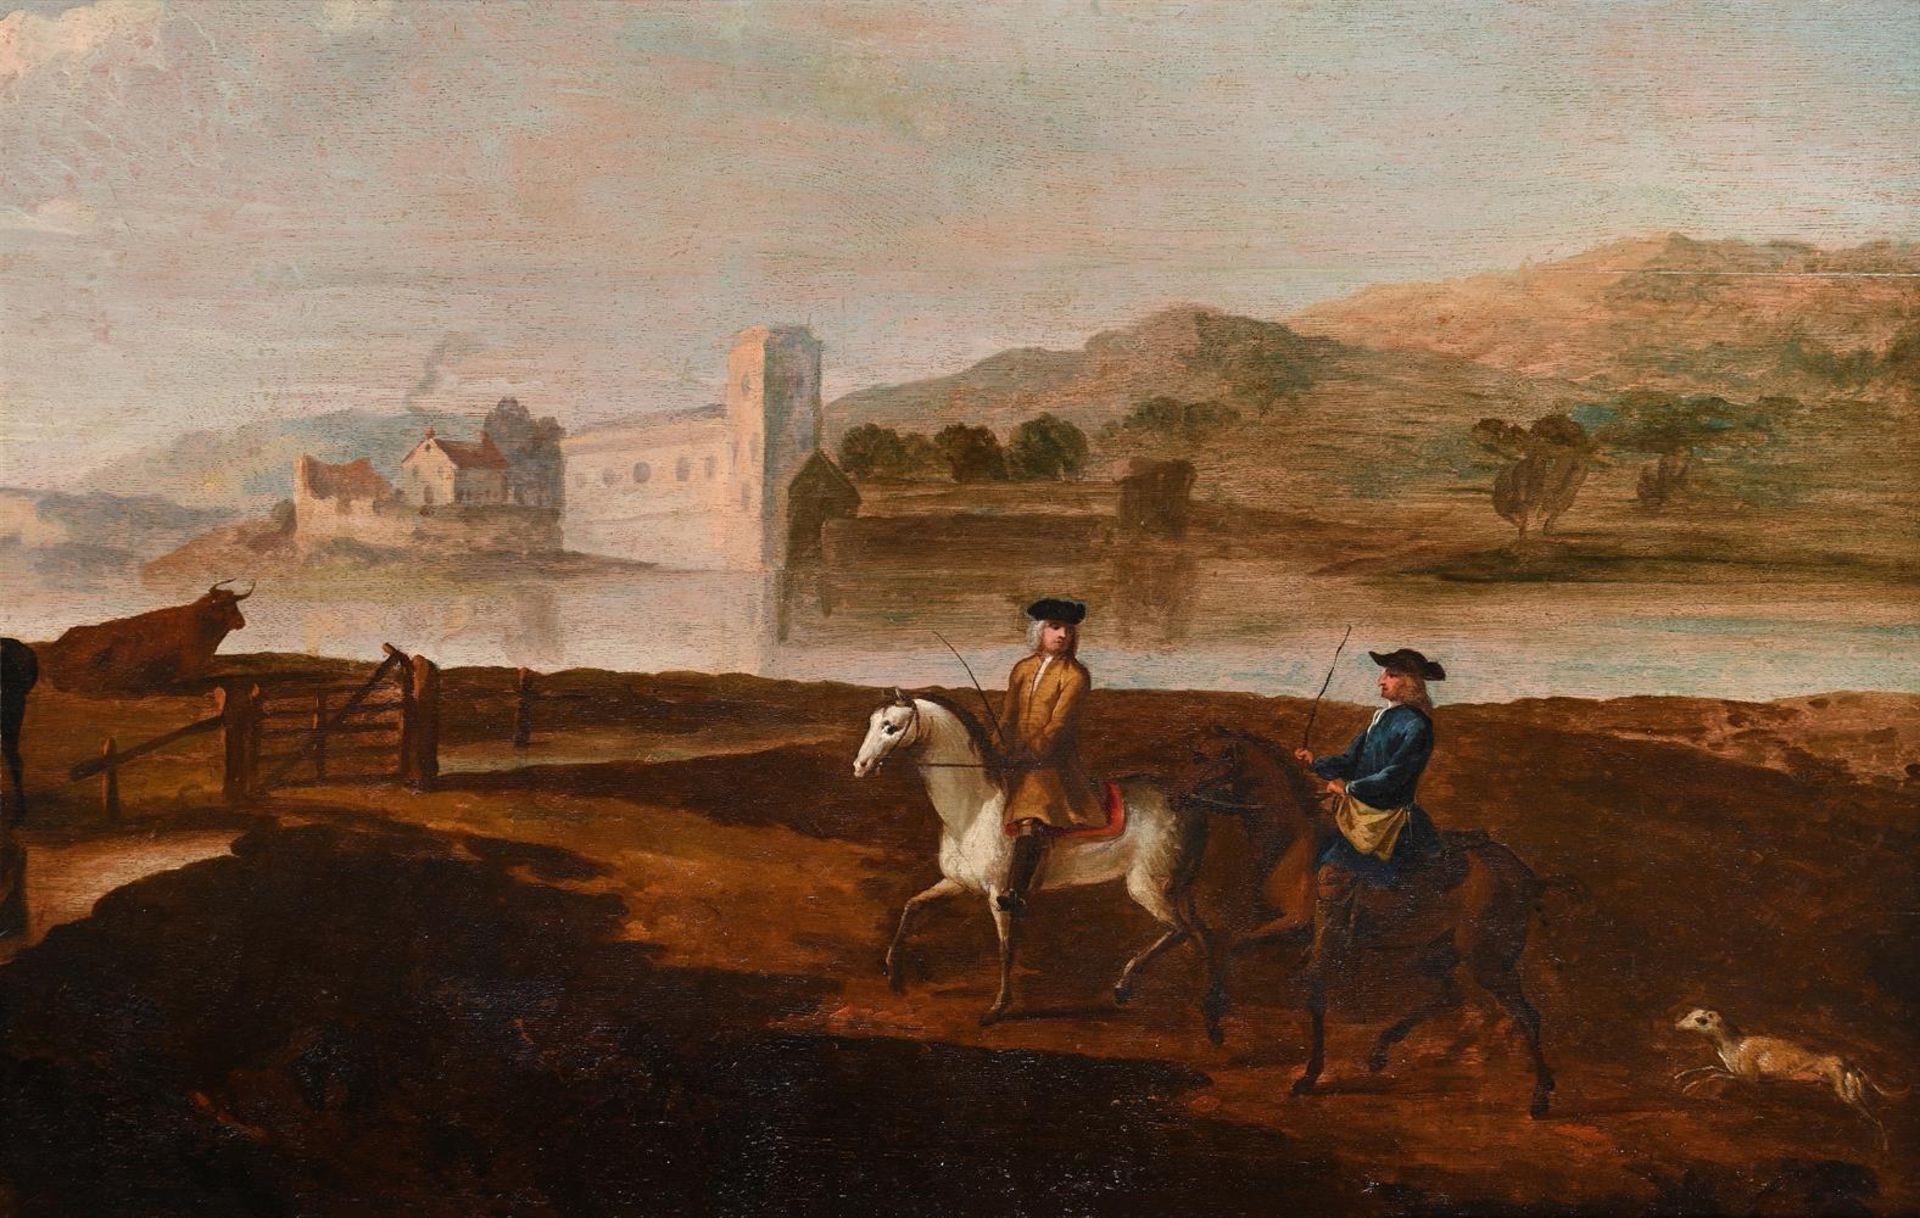 FOLLOWER OF PETER TILLEMANS, WILLIAM STONE ESQ RIDING IN A LANDSCAPE